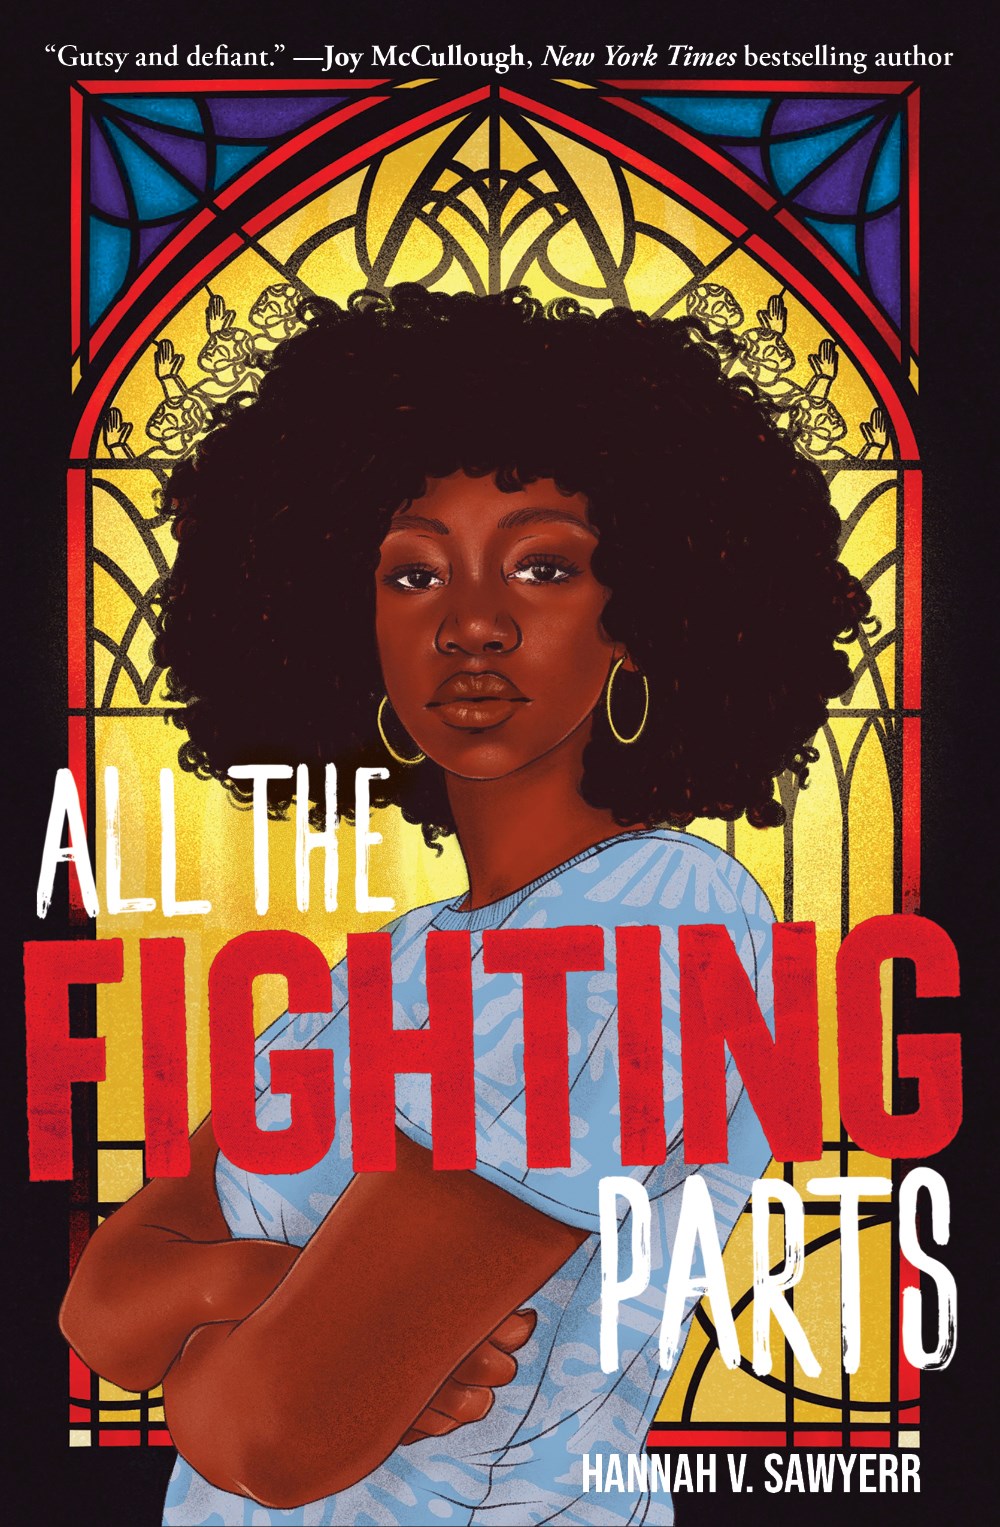 All The Fighting Parts by Hannah V. Sawyerr (Hardcover)